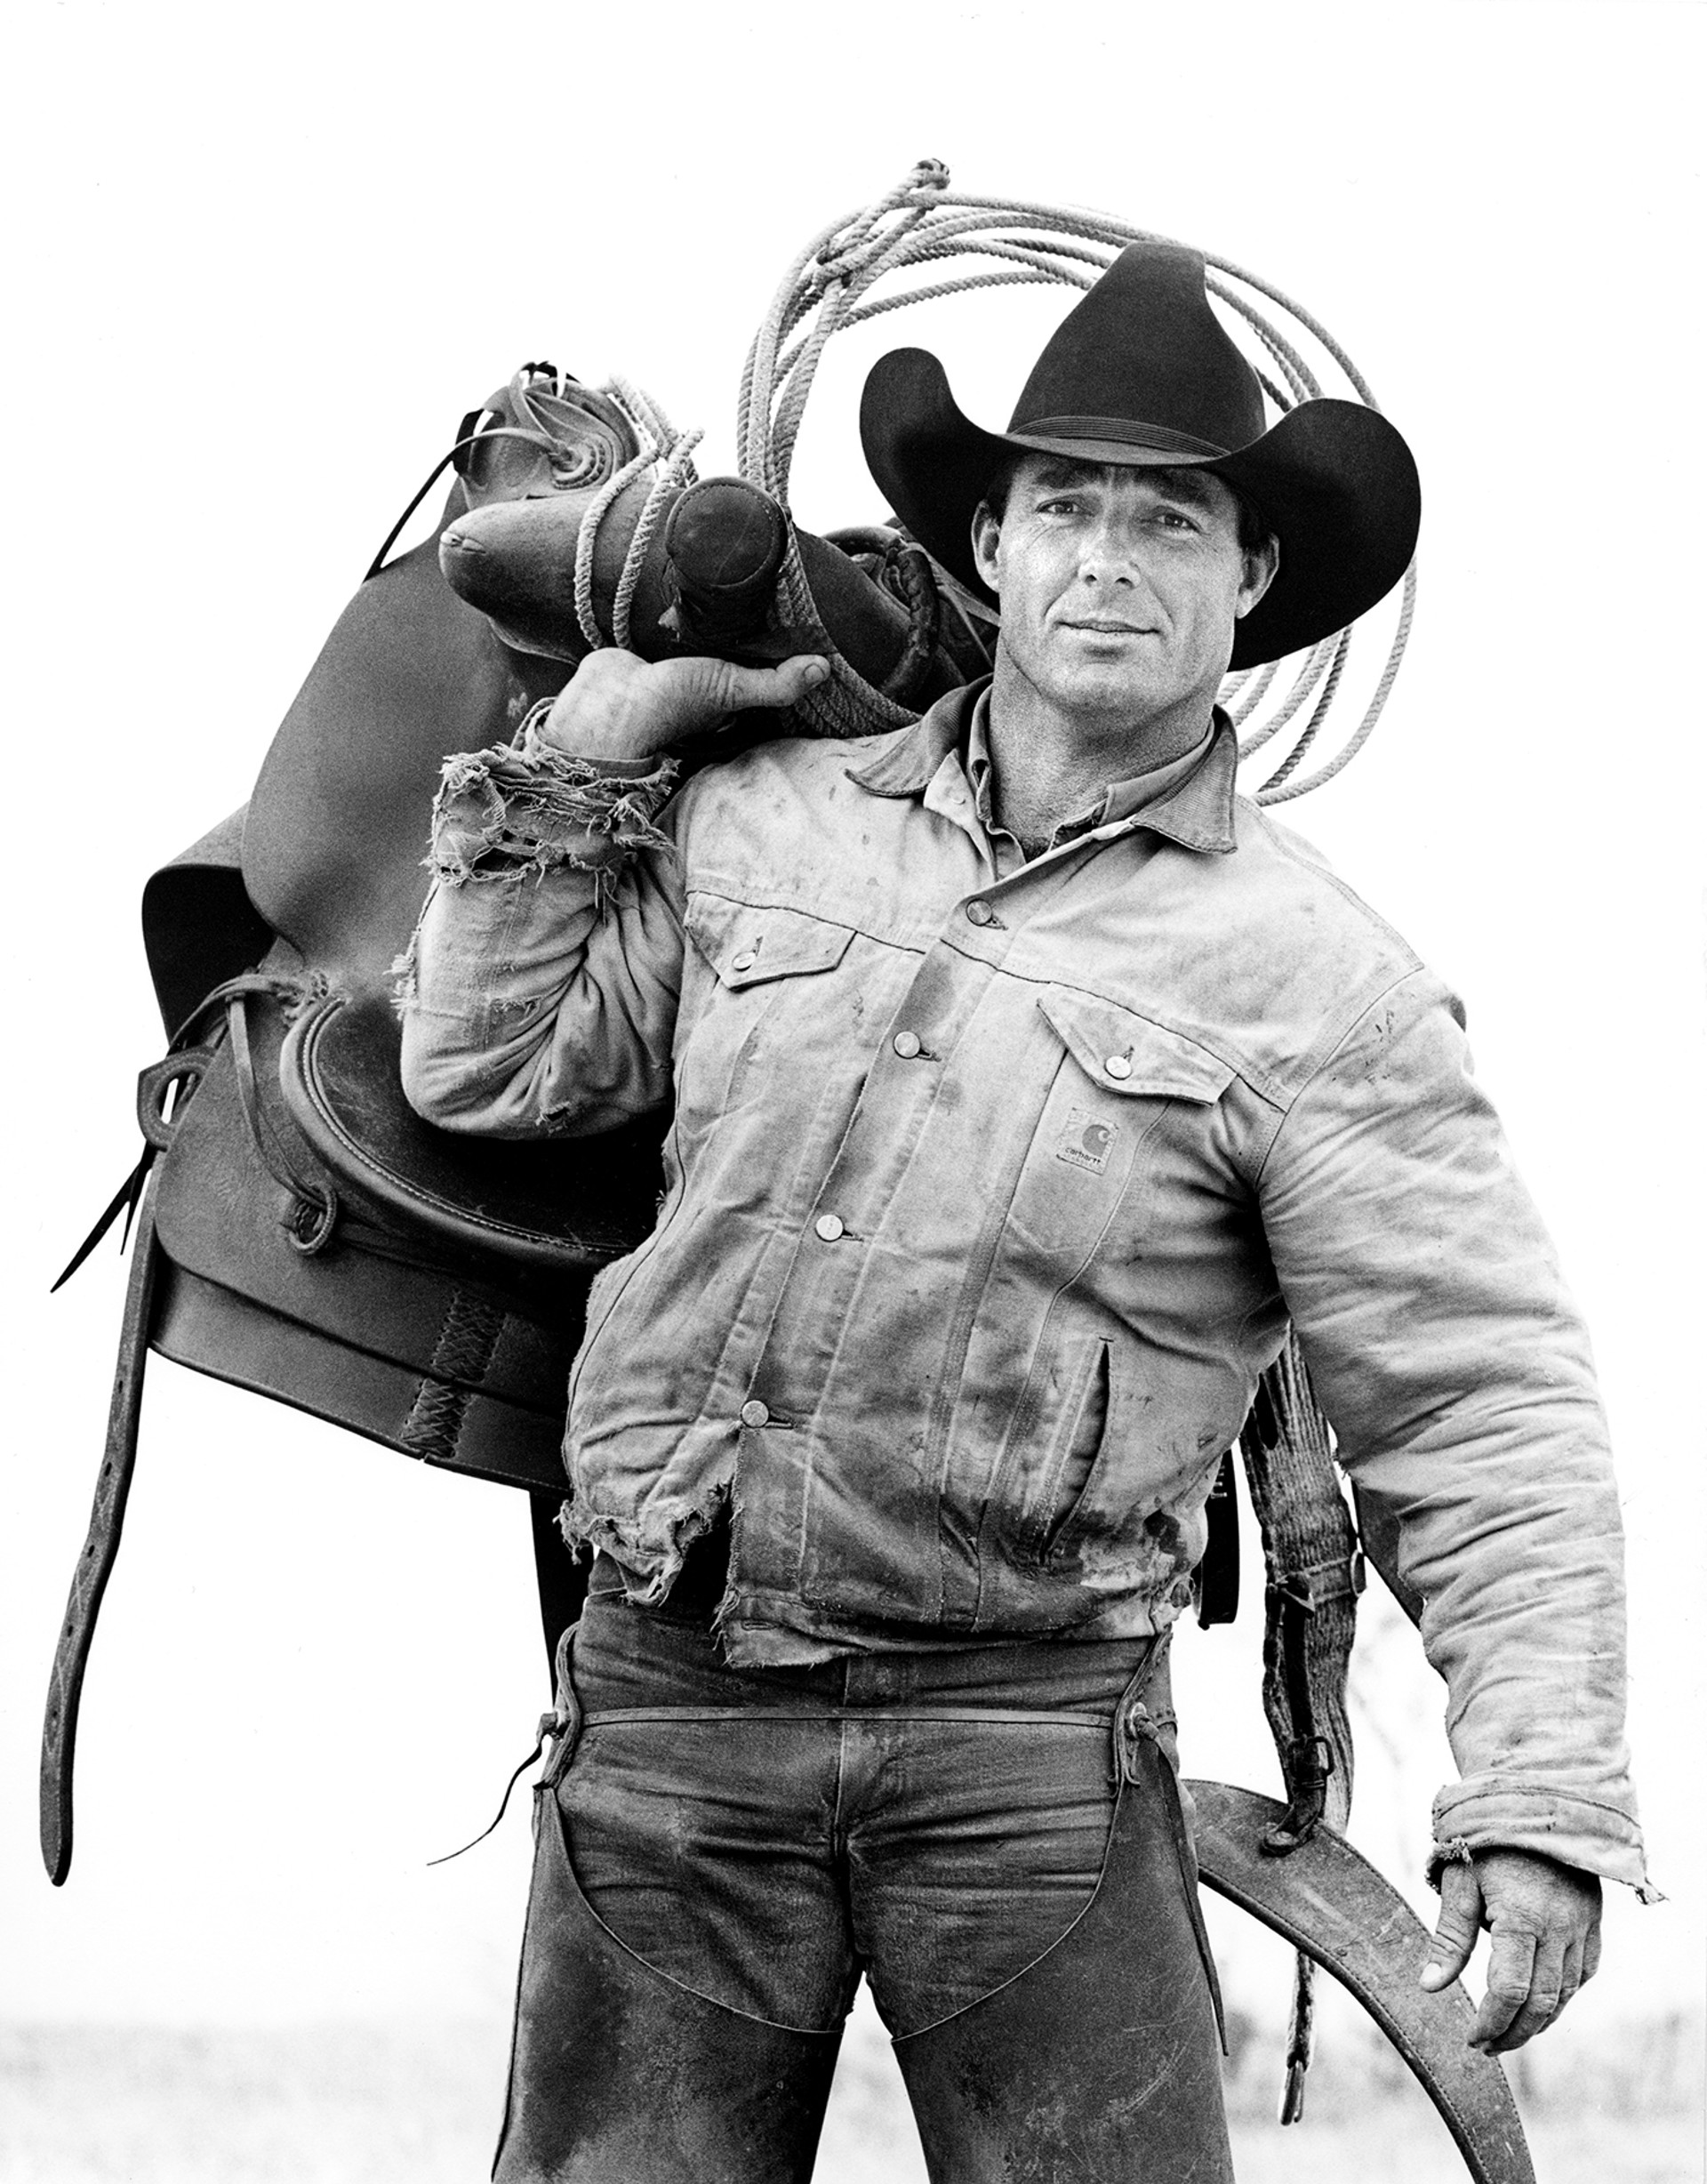 Donny Baize, Cowboy, J.R. Green Cattle Company\Shackelford County, Texas, March 18, 1997  6/10 by Laura Wilson